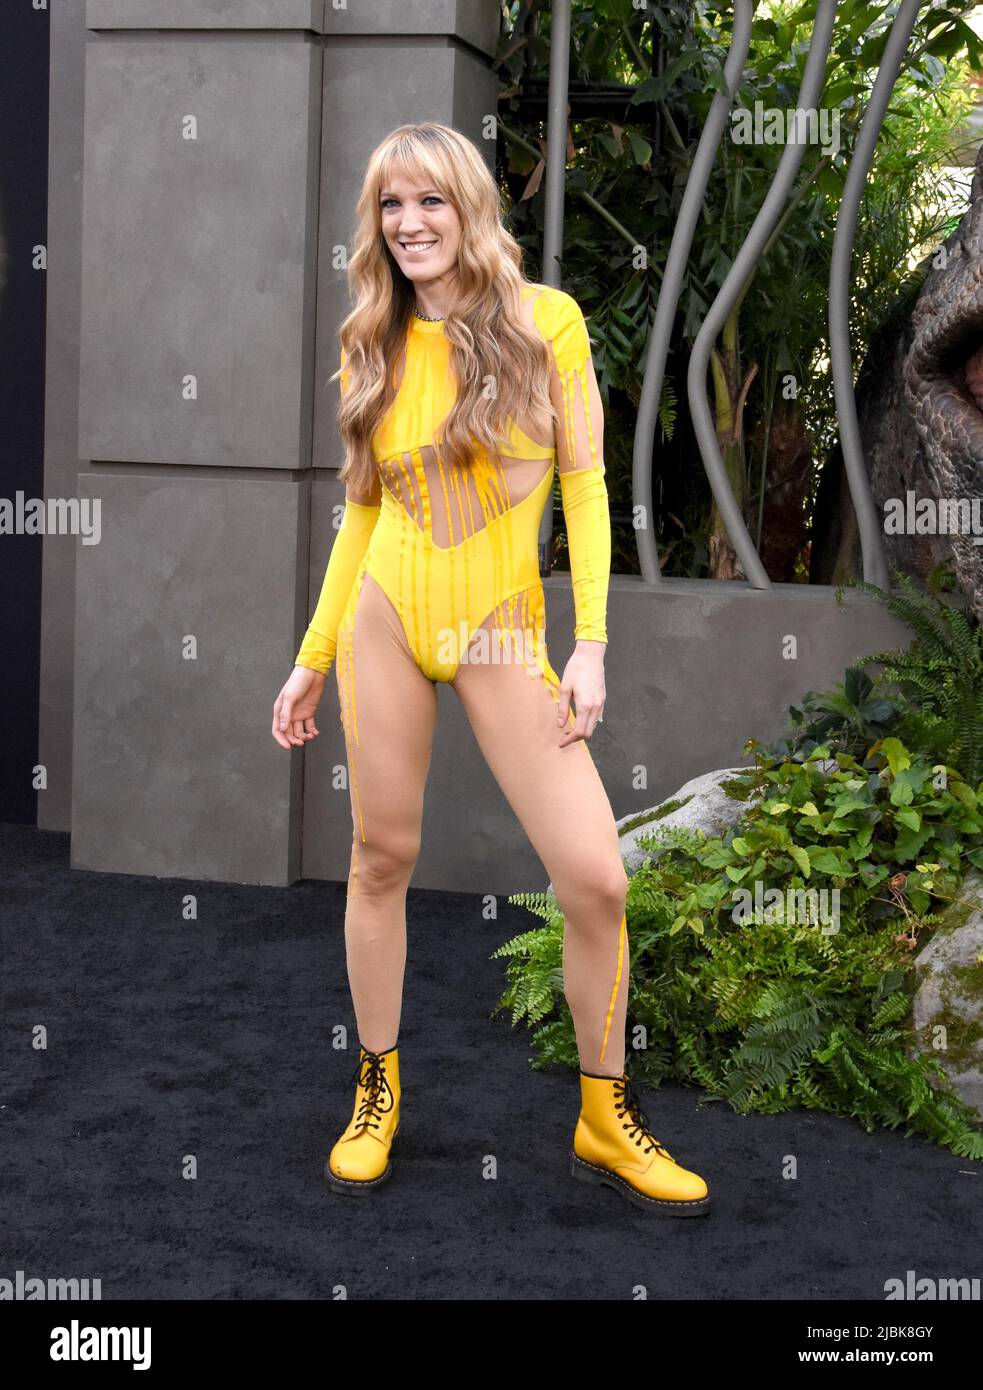 Hollywood, California, USA 6th June 2022 Screenwriter Emily Carmichael attends Universal Pictures Presents The World Premiere of 'Jurassic World Dominion' at TCL Chinese Theatre on June 6, 2022 in Hollywood, California, USA. Photo by Barry King/Alamy Live News Stock Photo